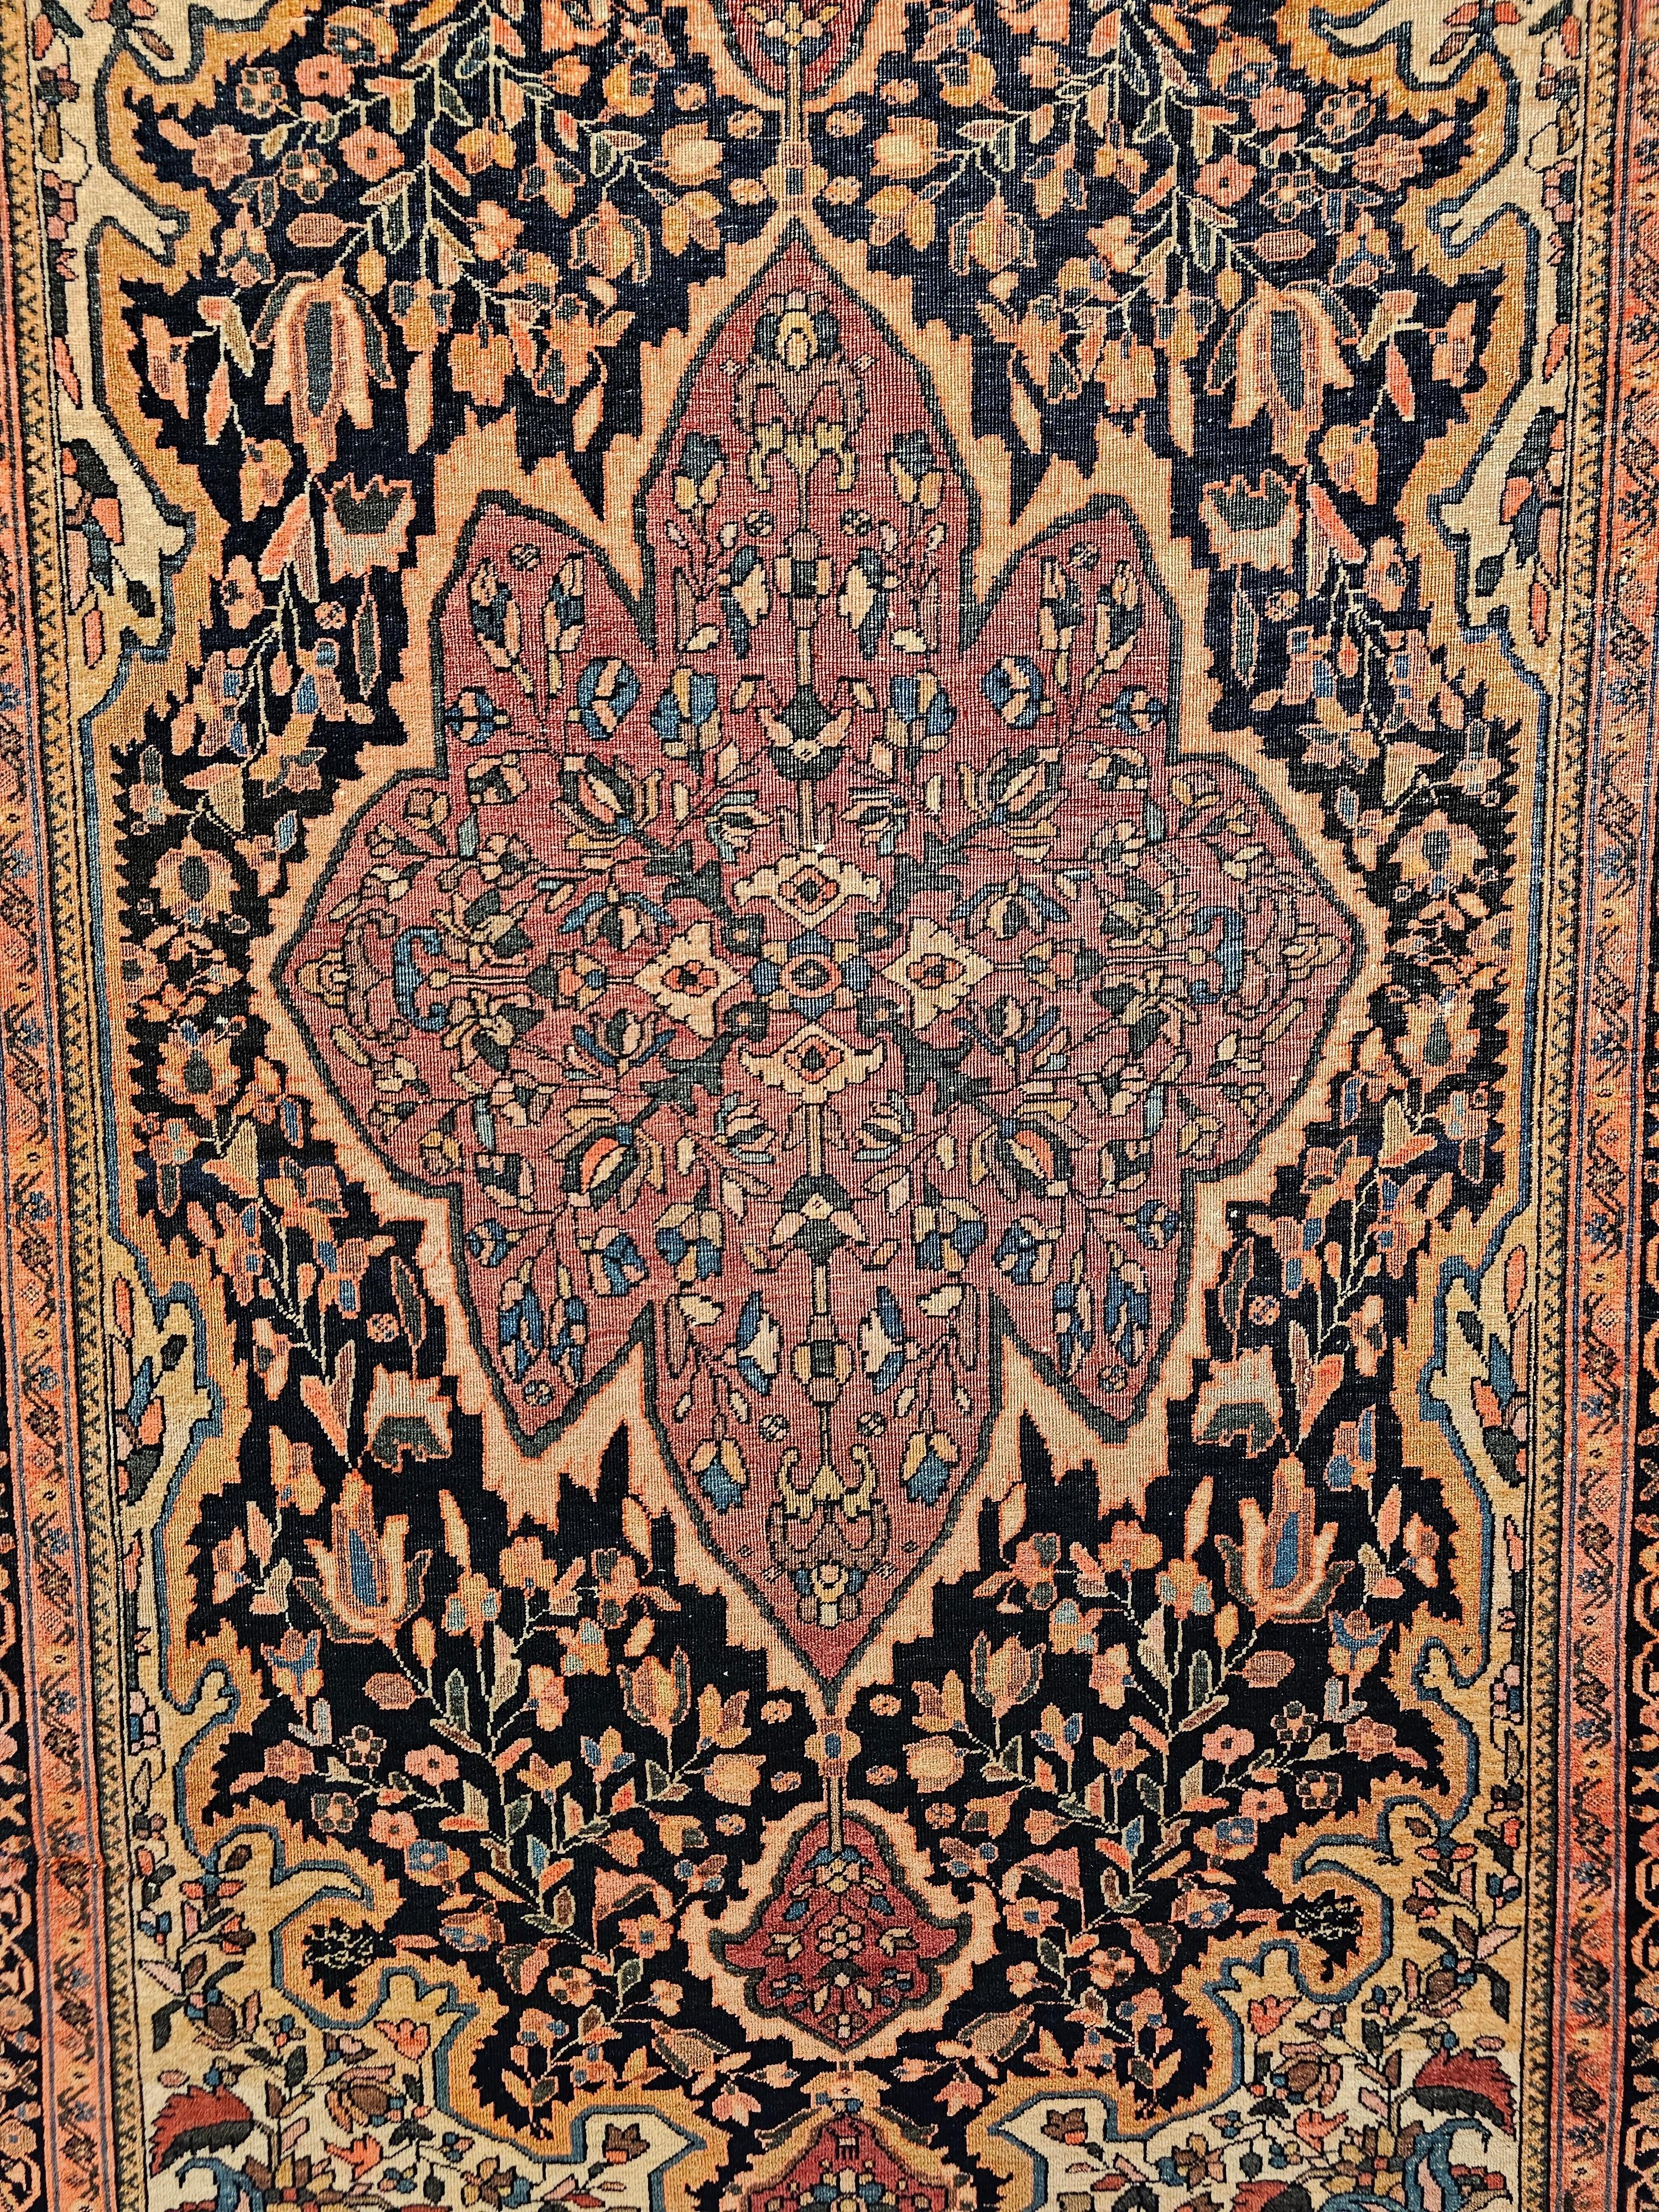 19th Century Persian Farahan Area Rug in Floral Pattern in Navy Blue, Plum Red In Good Condition For Sale In Barrington, IL